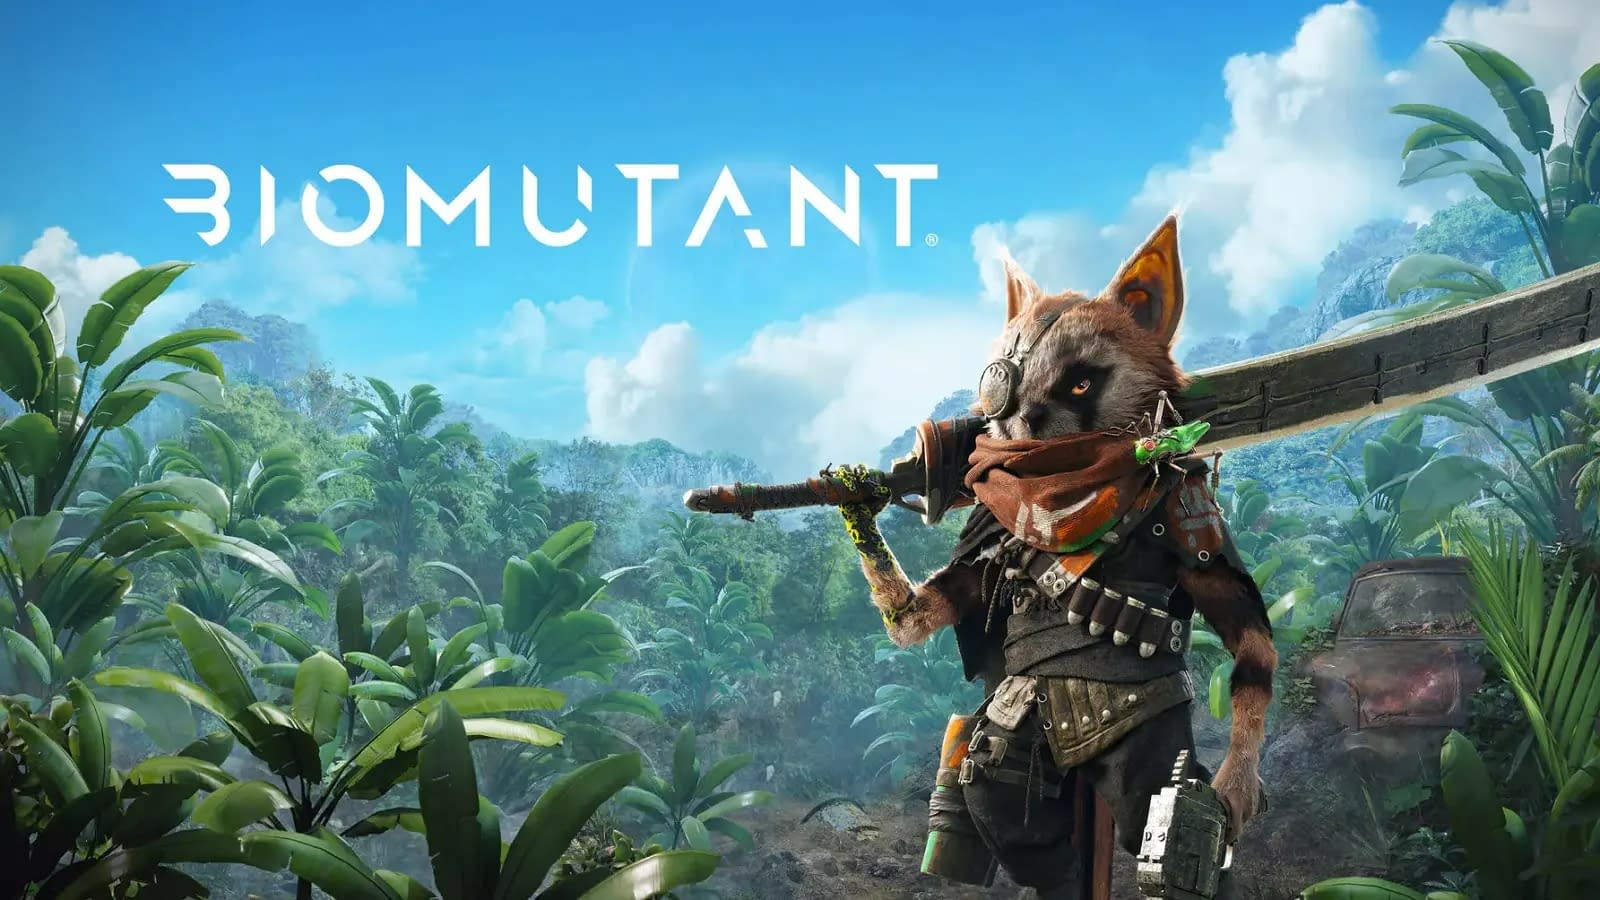 Biomutant Switch comes to console: Output date is announced